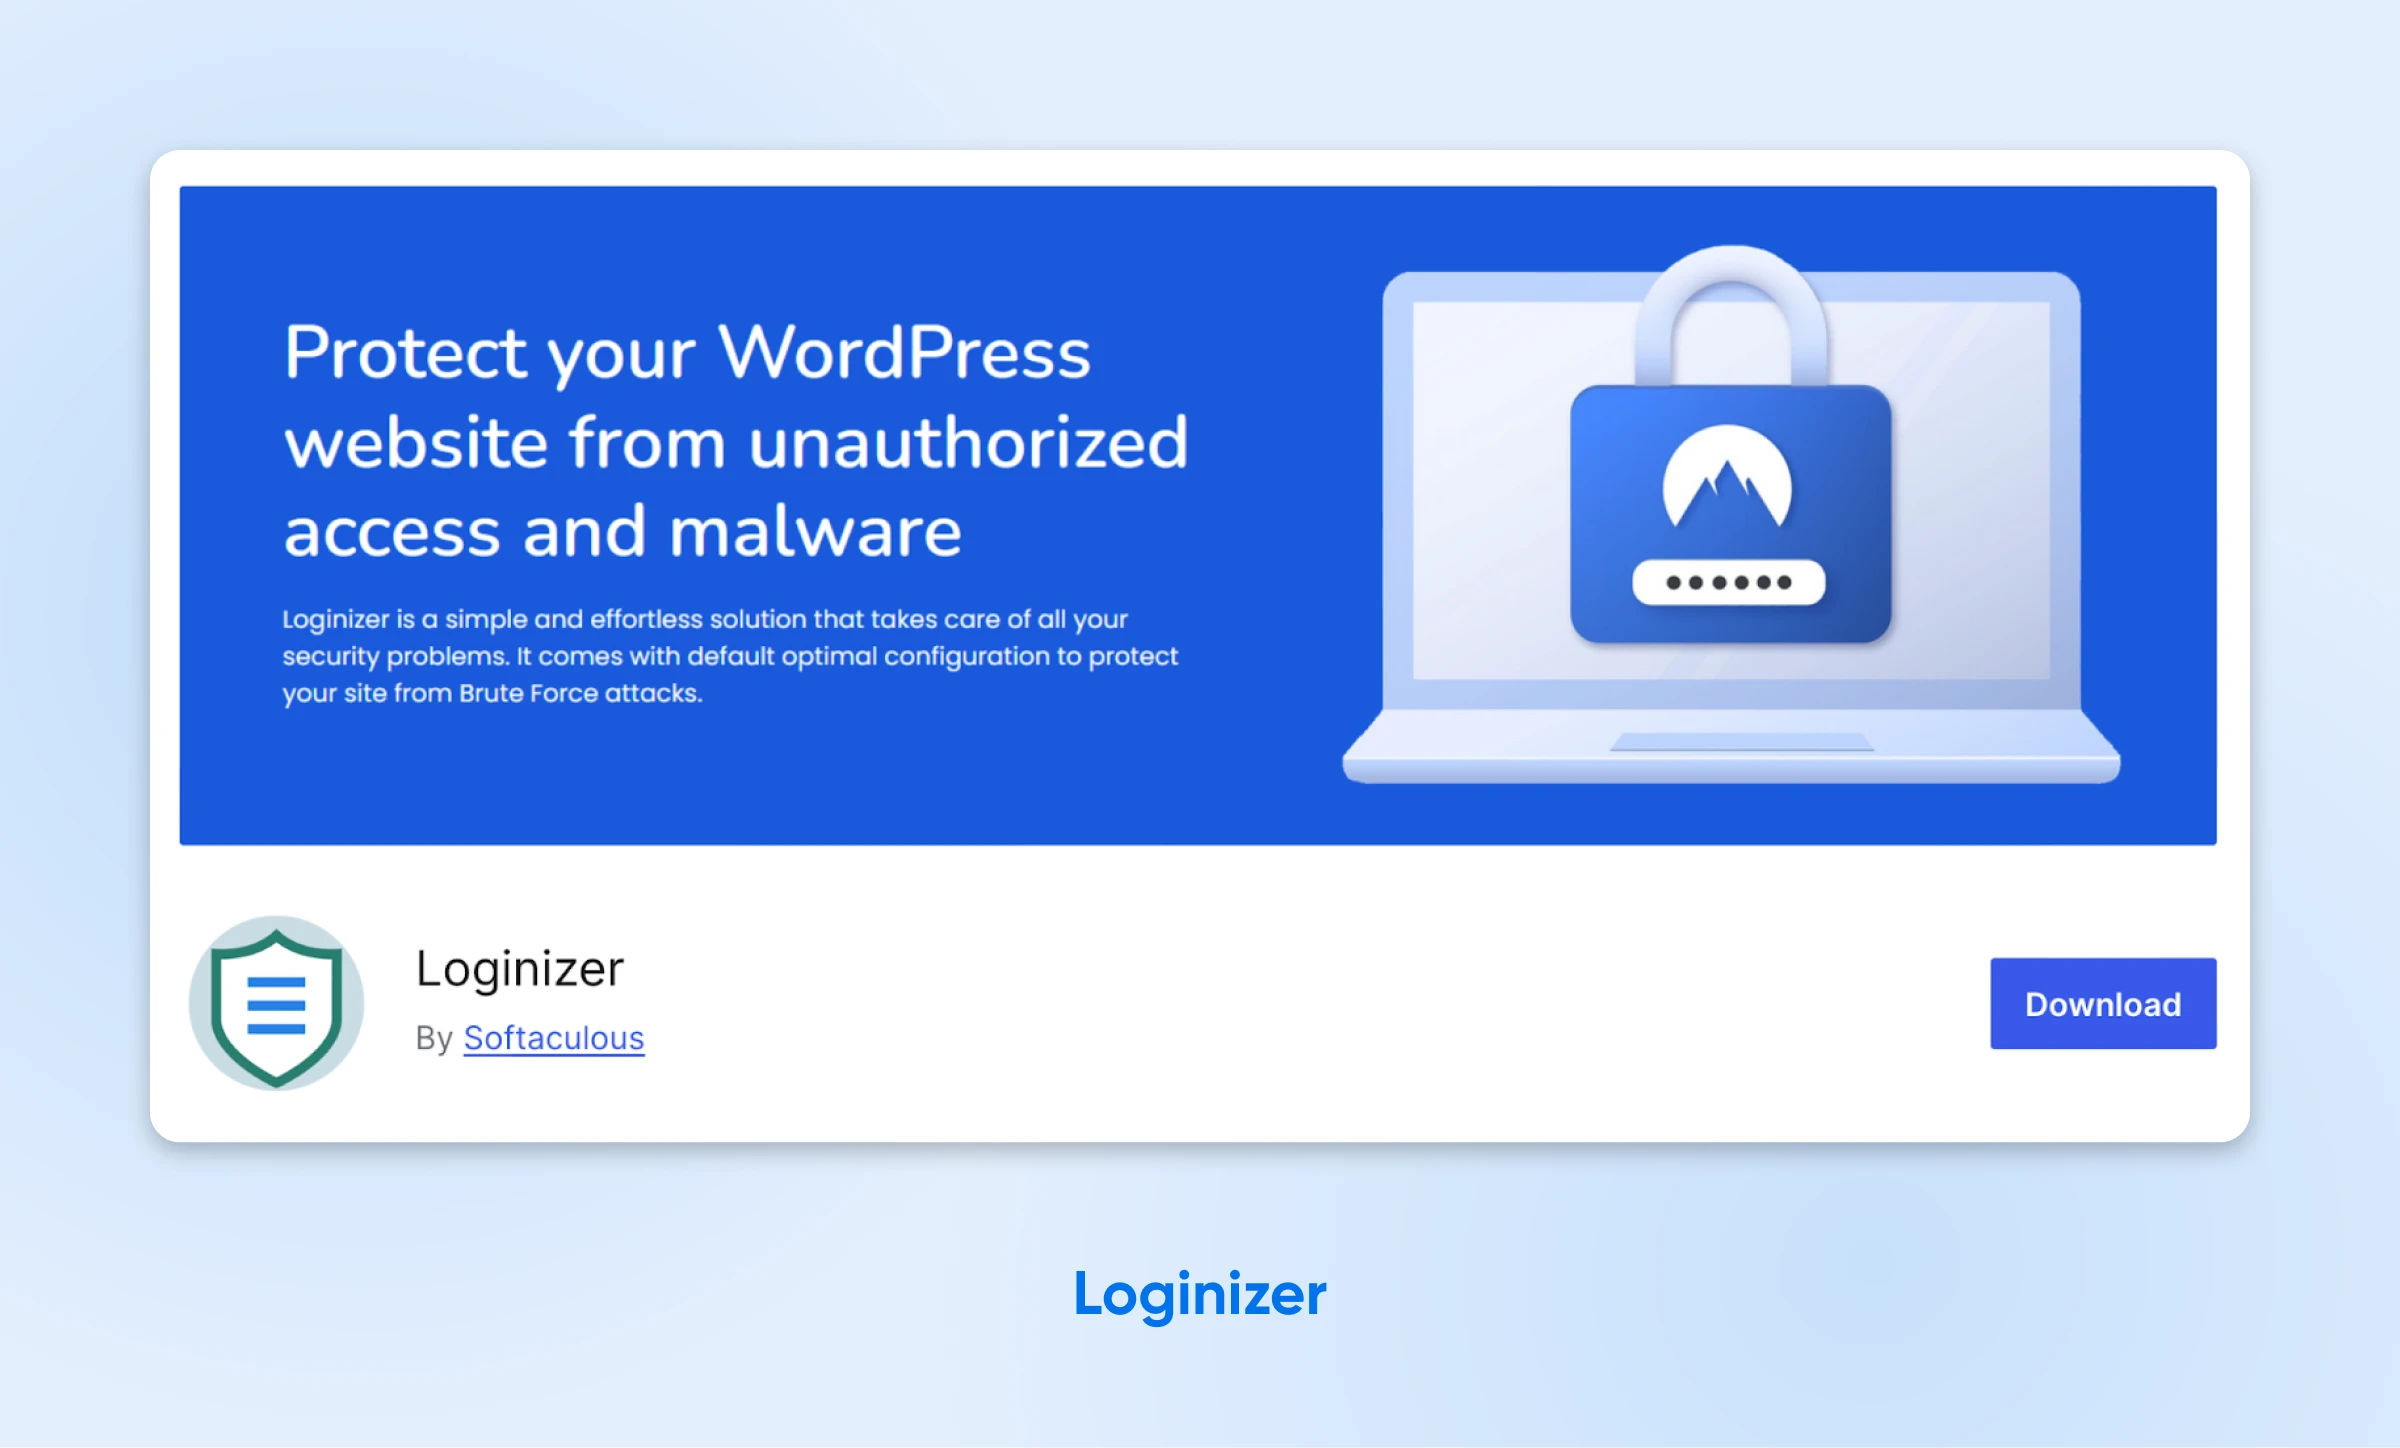 Ad for Loginizer plugin providing security solutions to protect WP websites from unauthorized access and malware attacks.